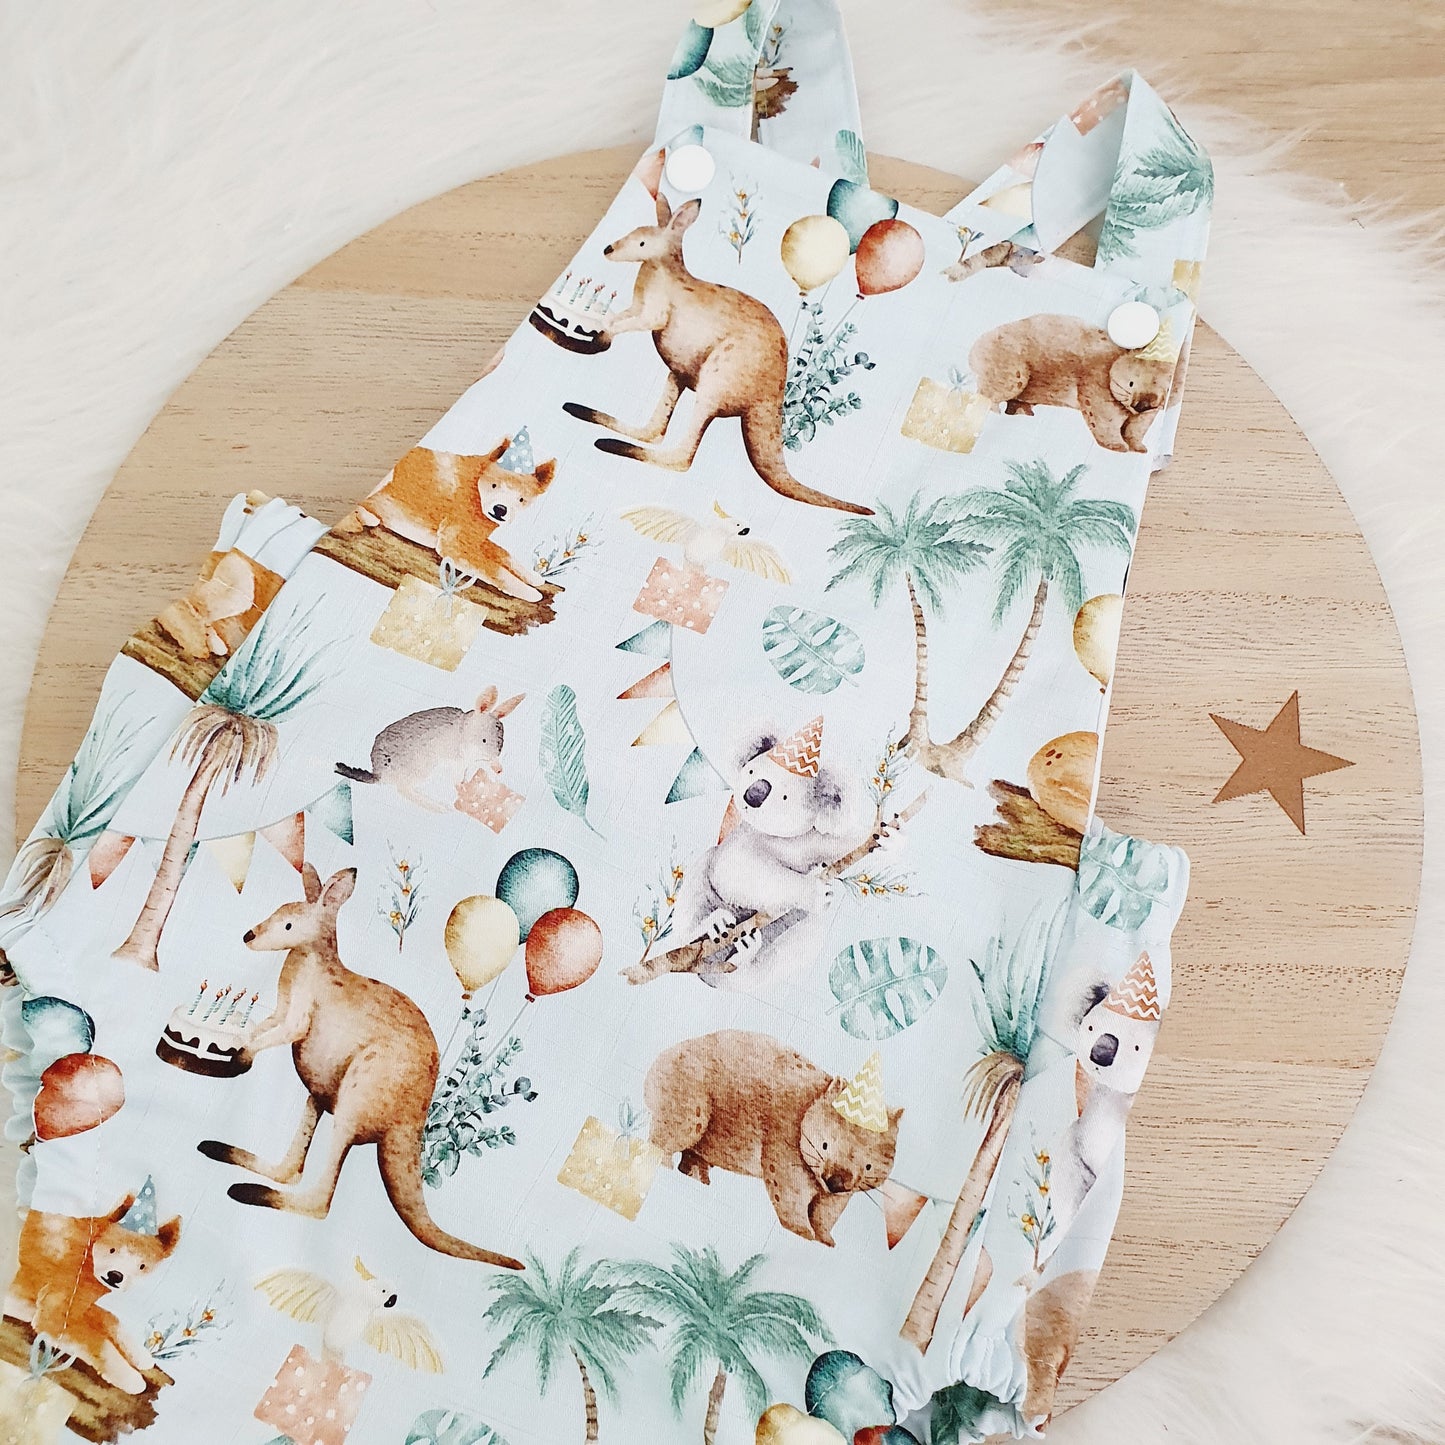 ANIMAL PARTY Baby Romper, Handmade Baby Clothing, Size 0 - 1st Birthday Clothing / Cake Smash Outfit, 9 - 12 months